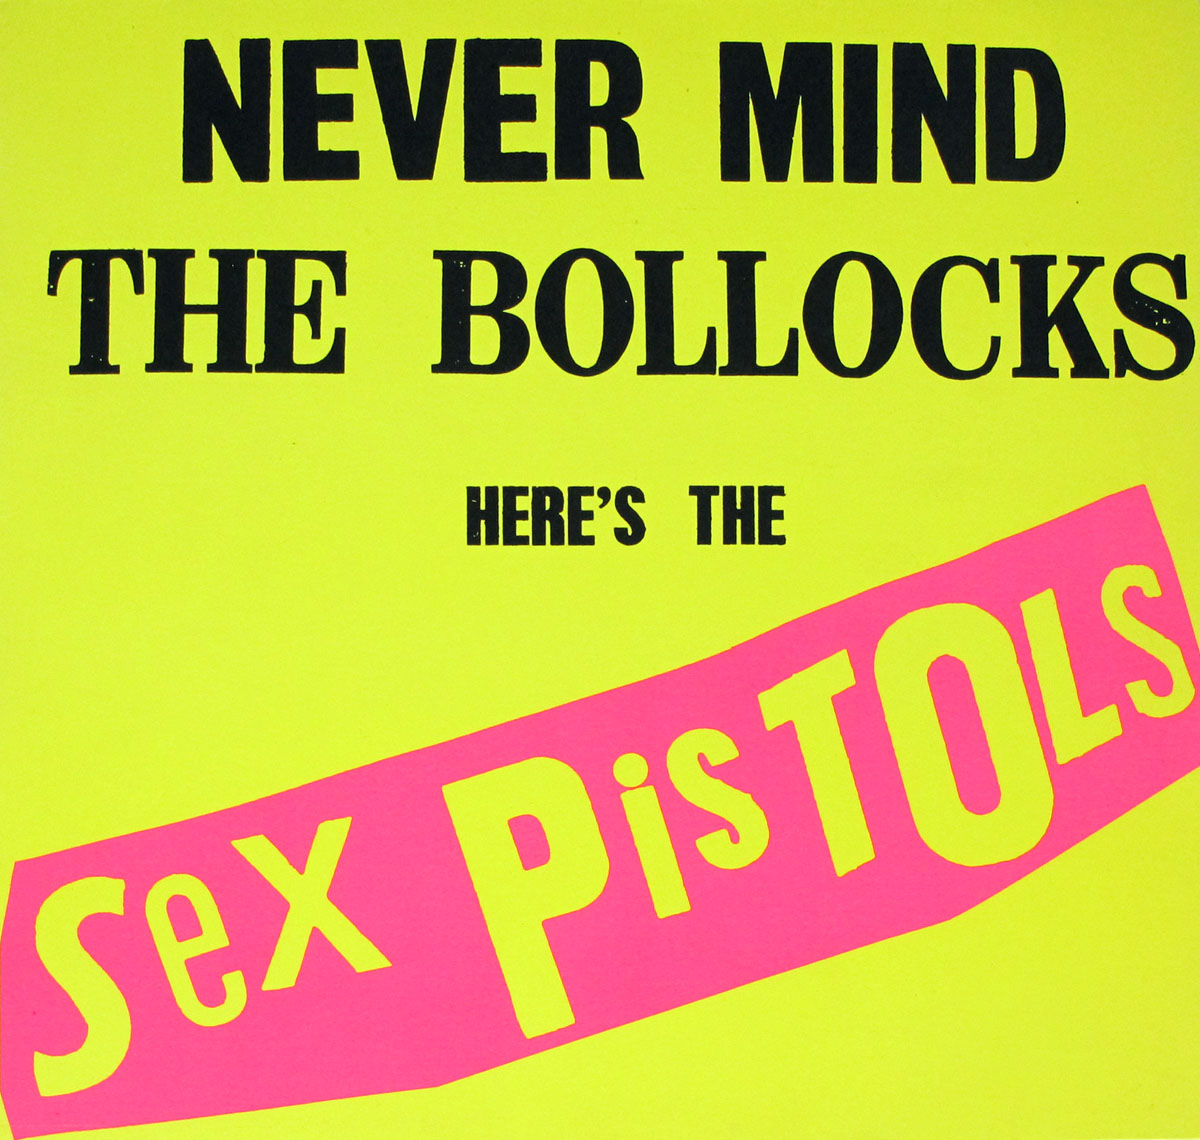 High Resolution Photos of sex pistols never mind yellow cover 